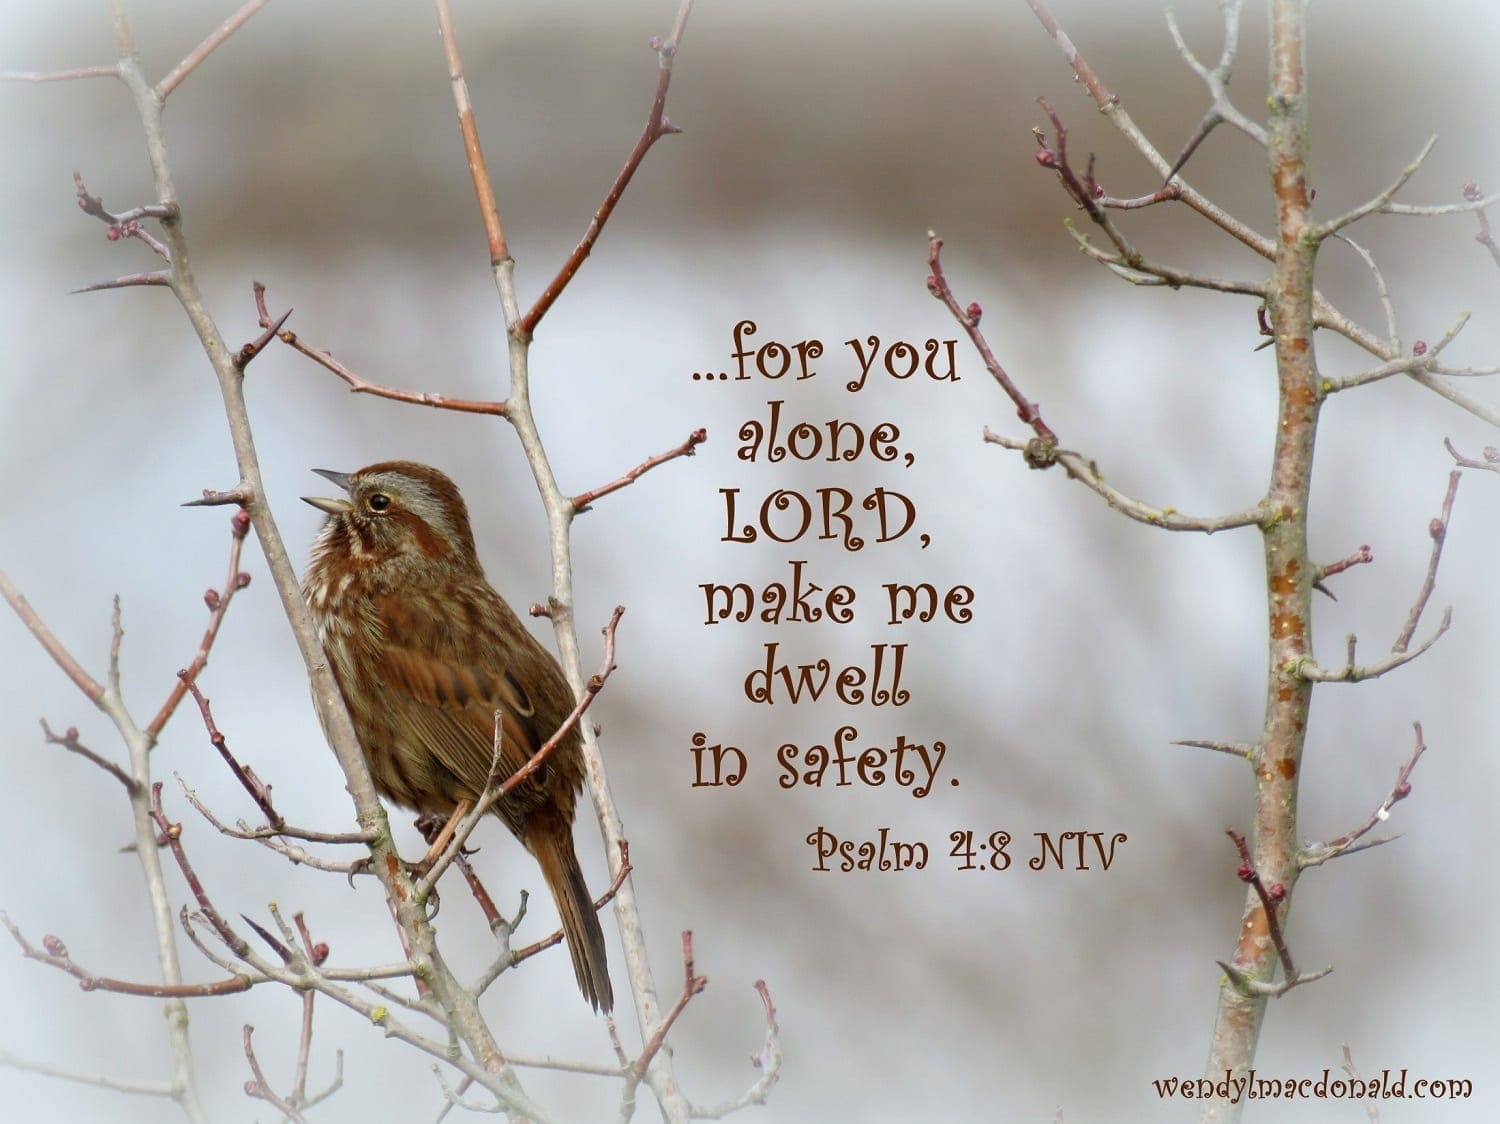 Sparrow with Psalm 4:8, Photo credit: Wendy MacDonald